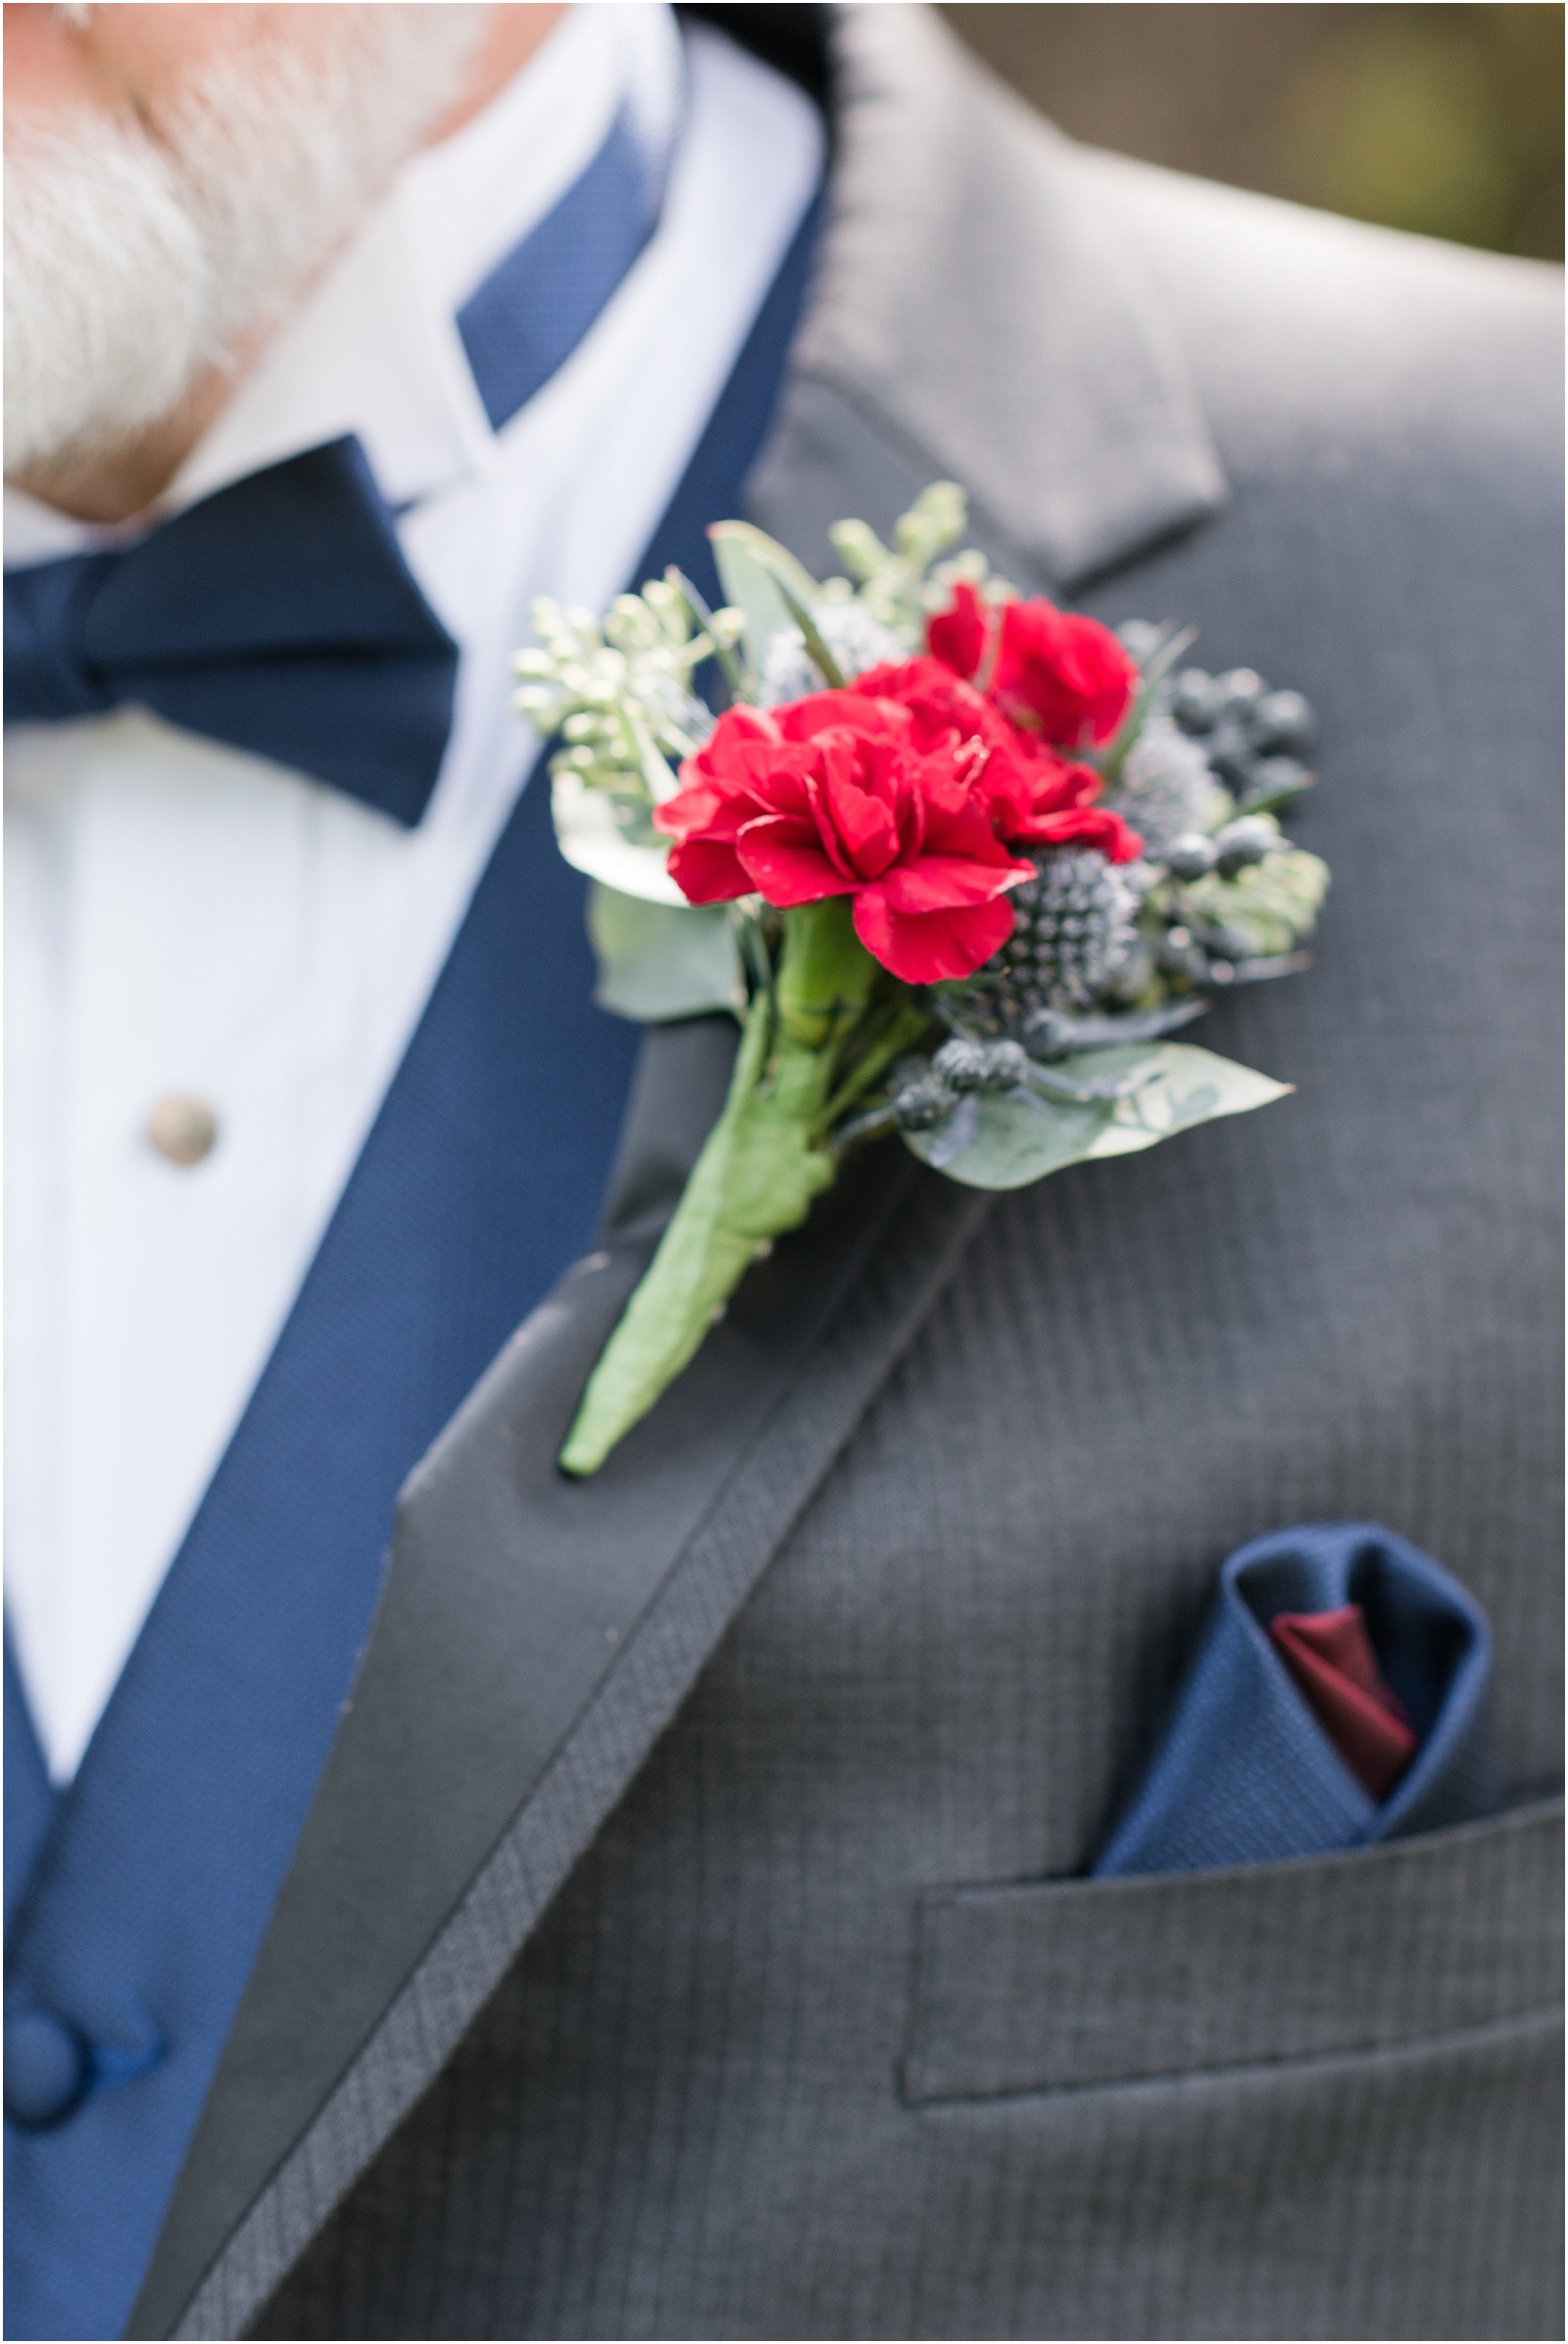 Michelle and Sara Photography, Michelle and Sara weddings, michelle robinson photography, burke manor inn, groom details, boutonniere, floral details for groom, red florals, fall boutonniere, navy and gray suit